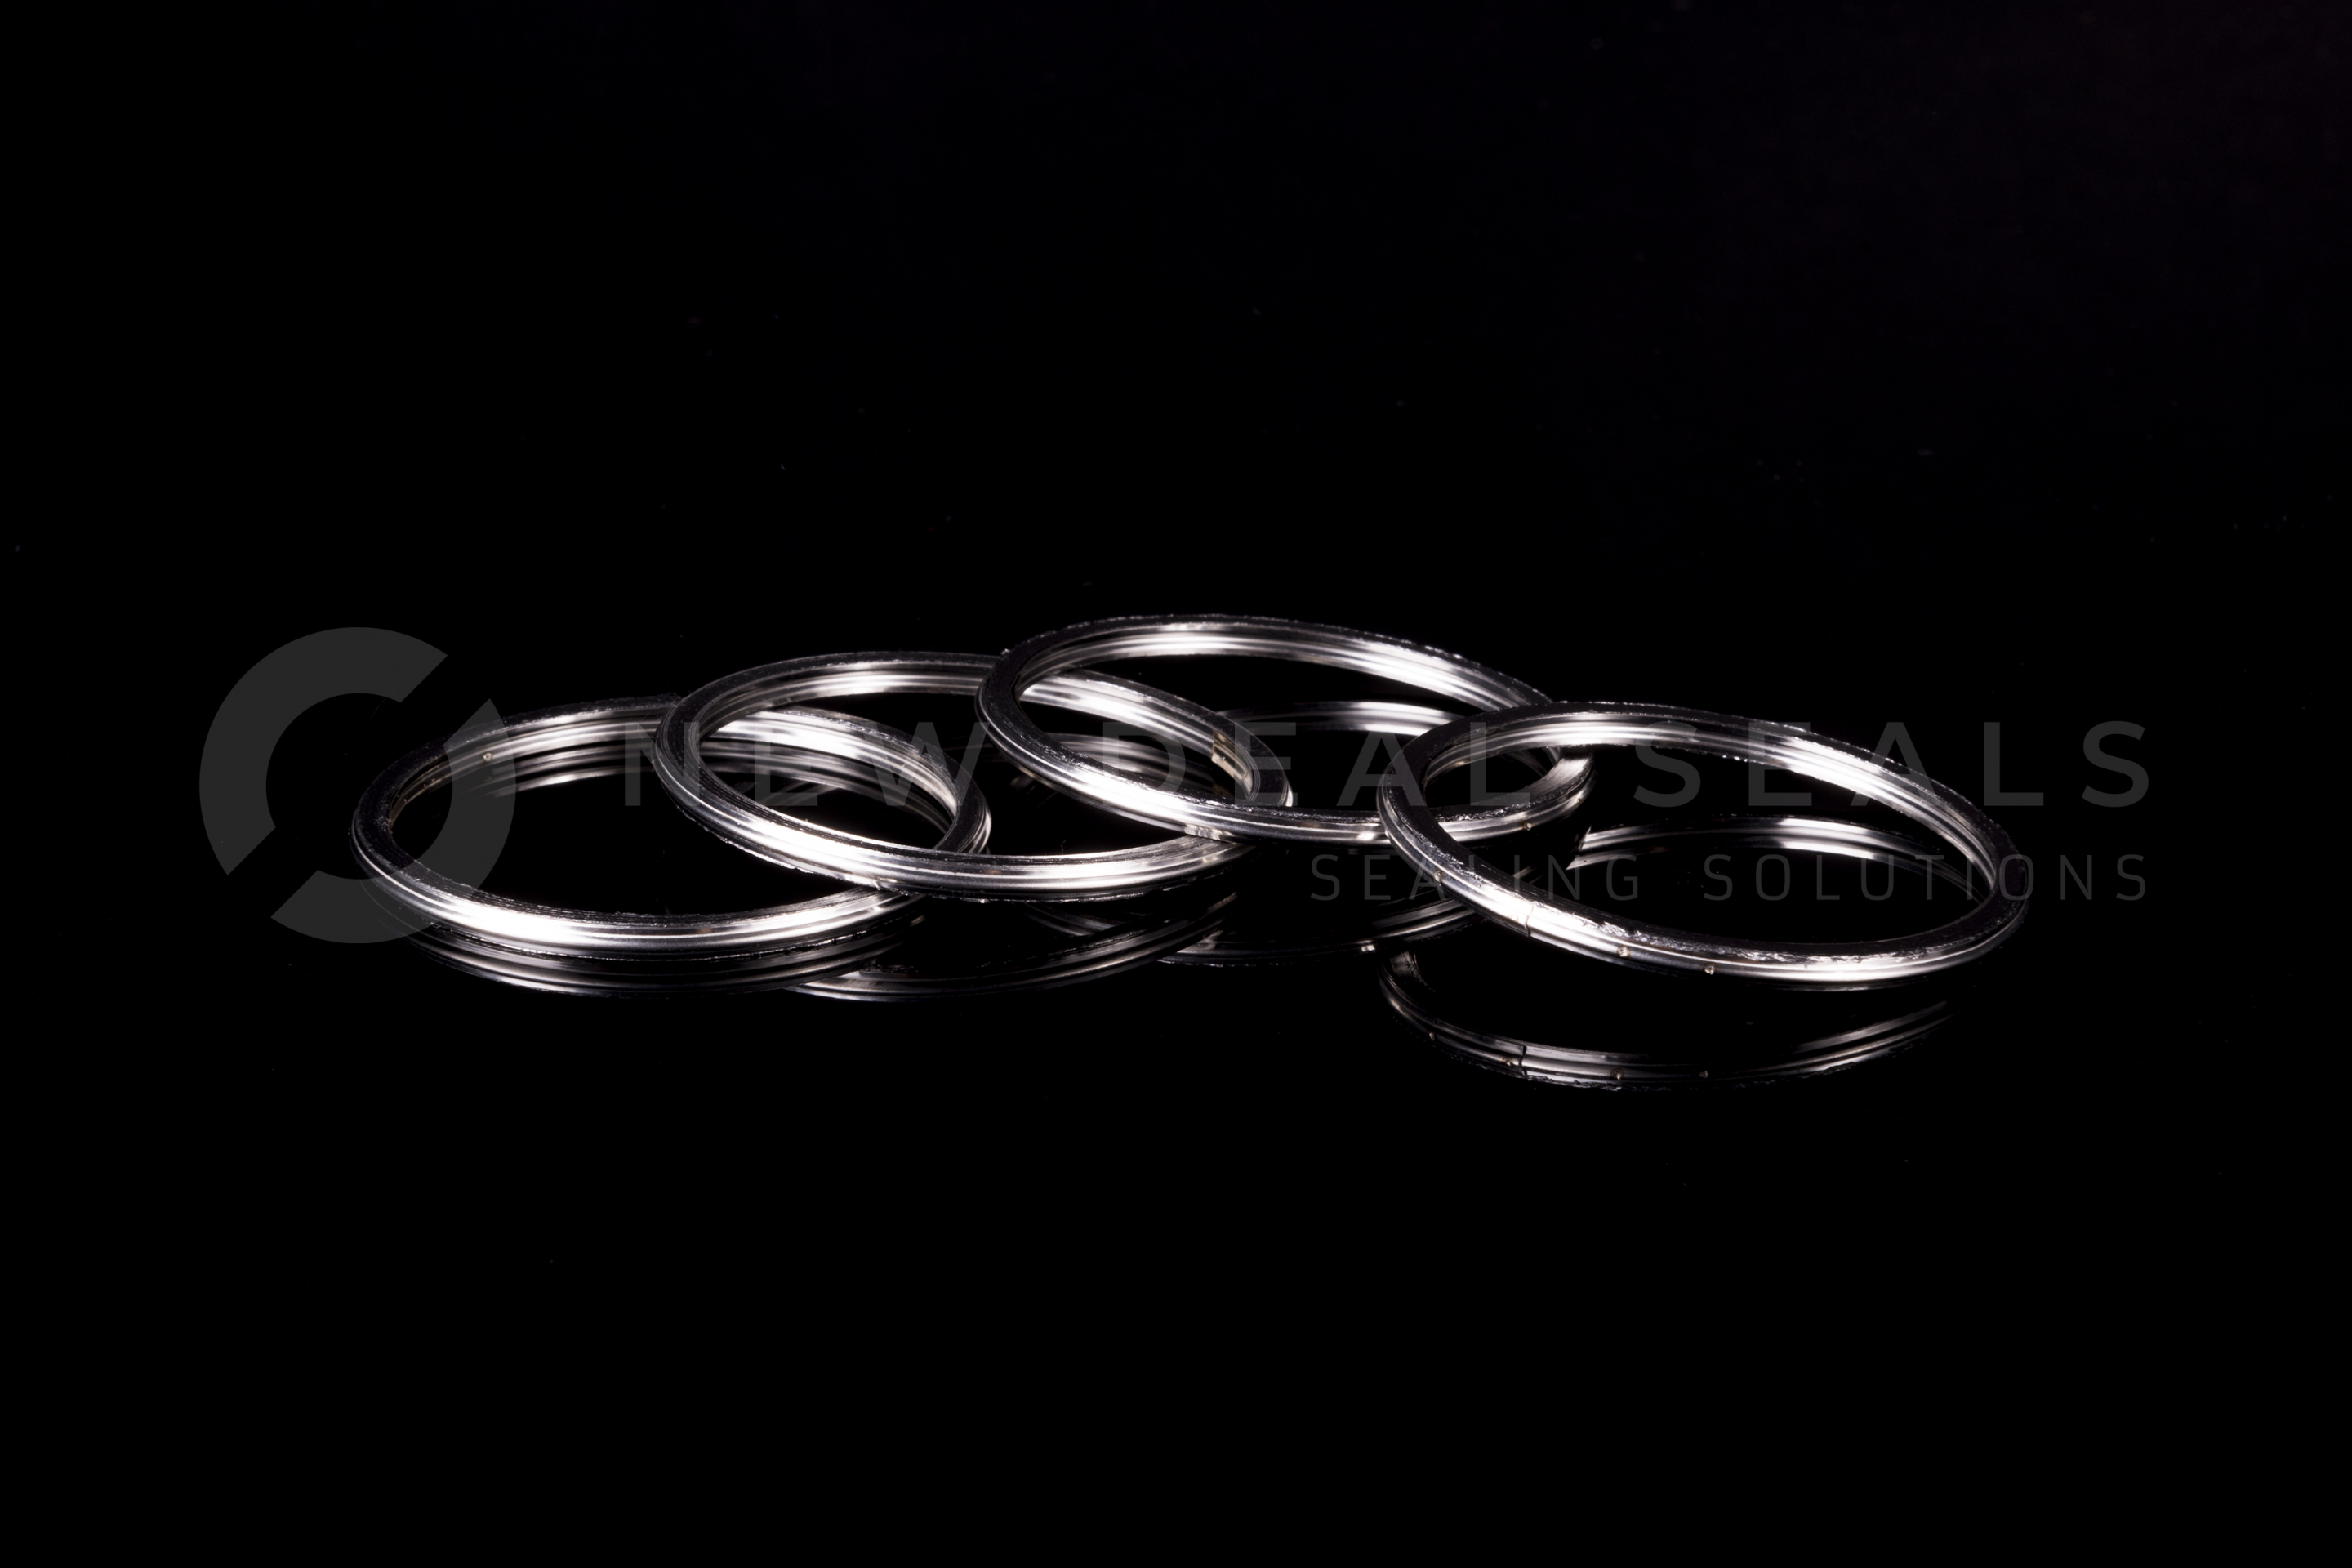 We Offer High-Quality Metal Backed Seal Rings - ROC Carbon